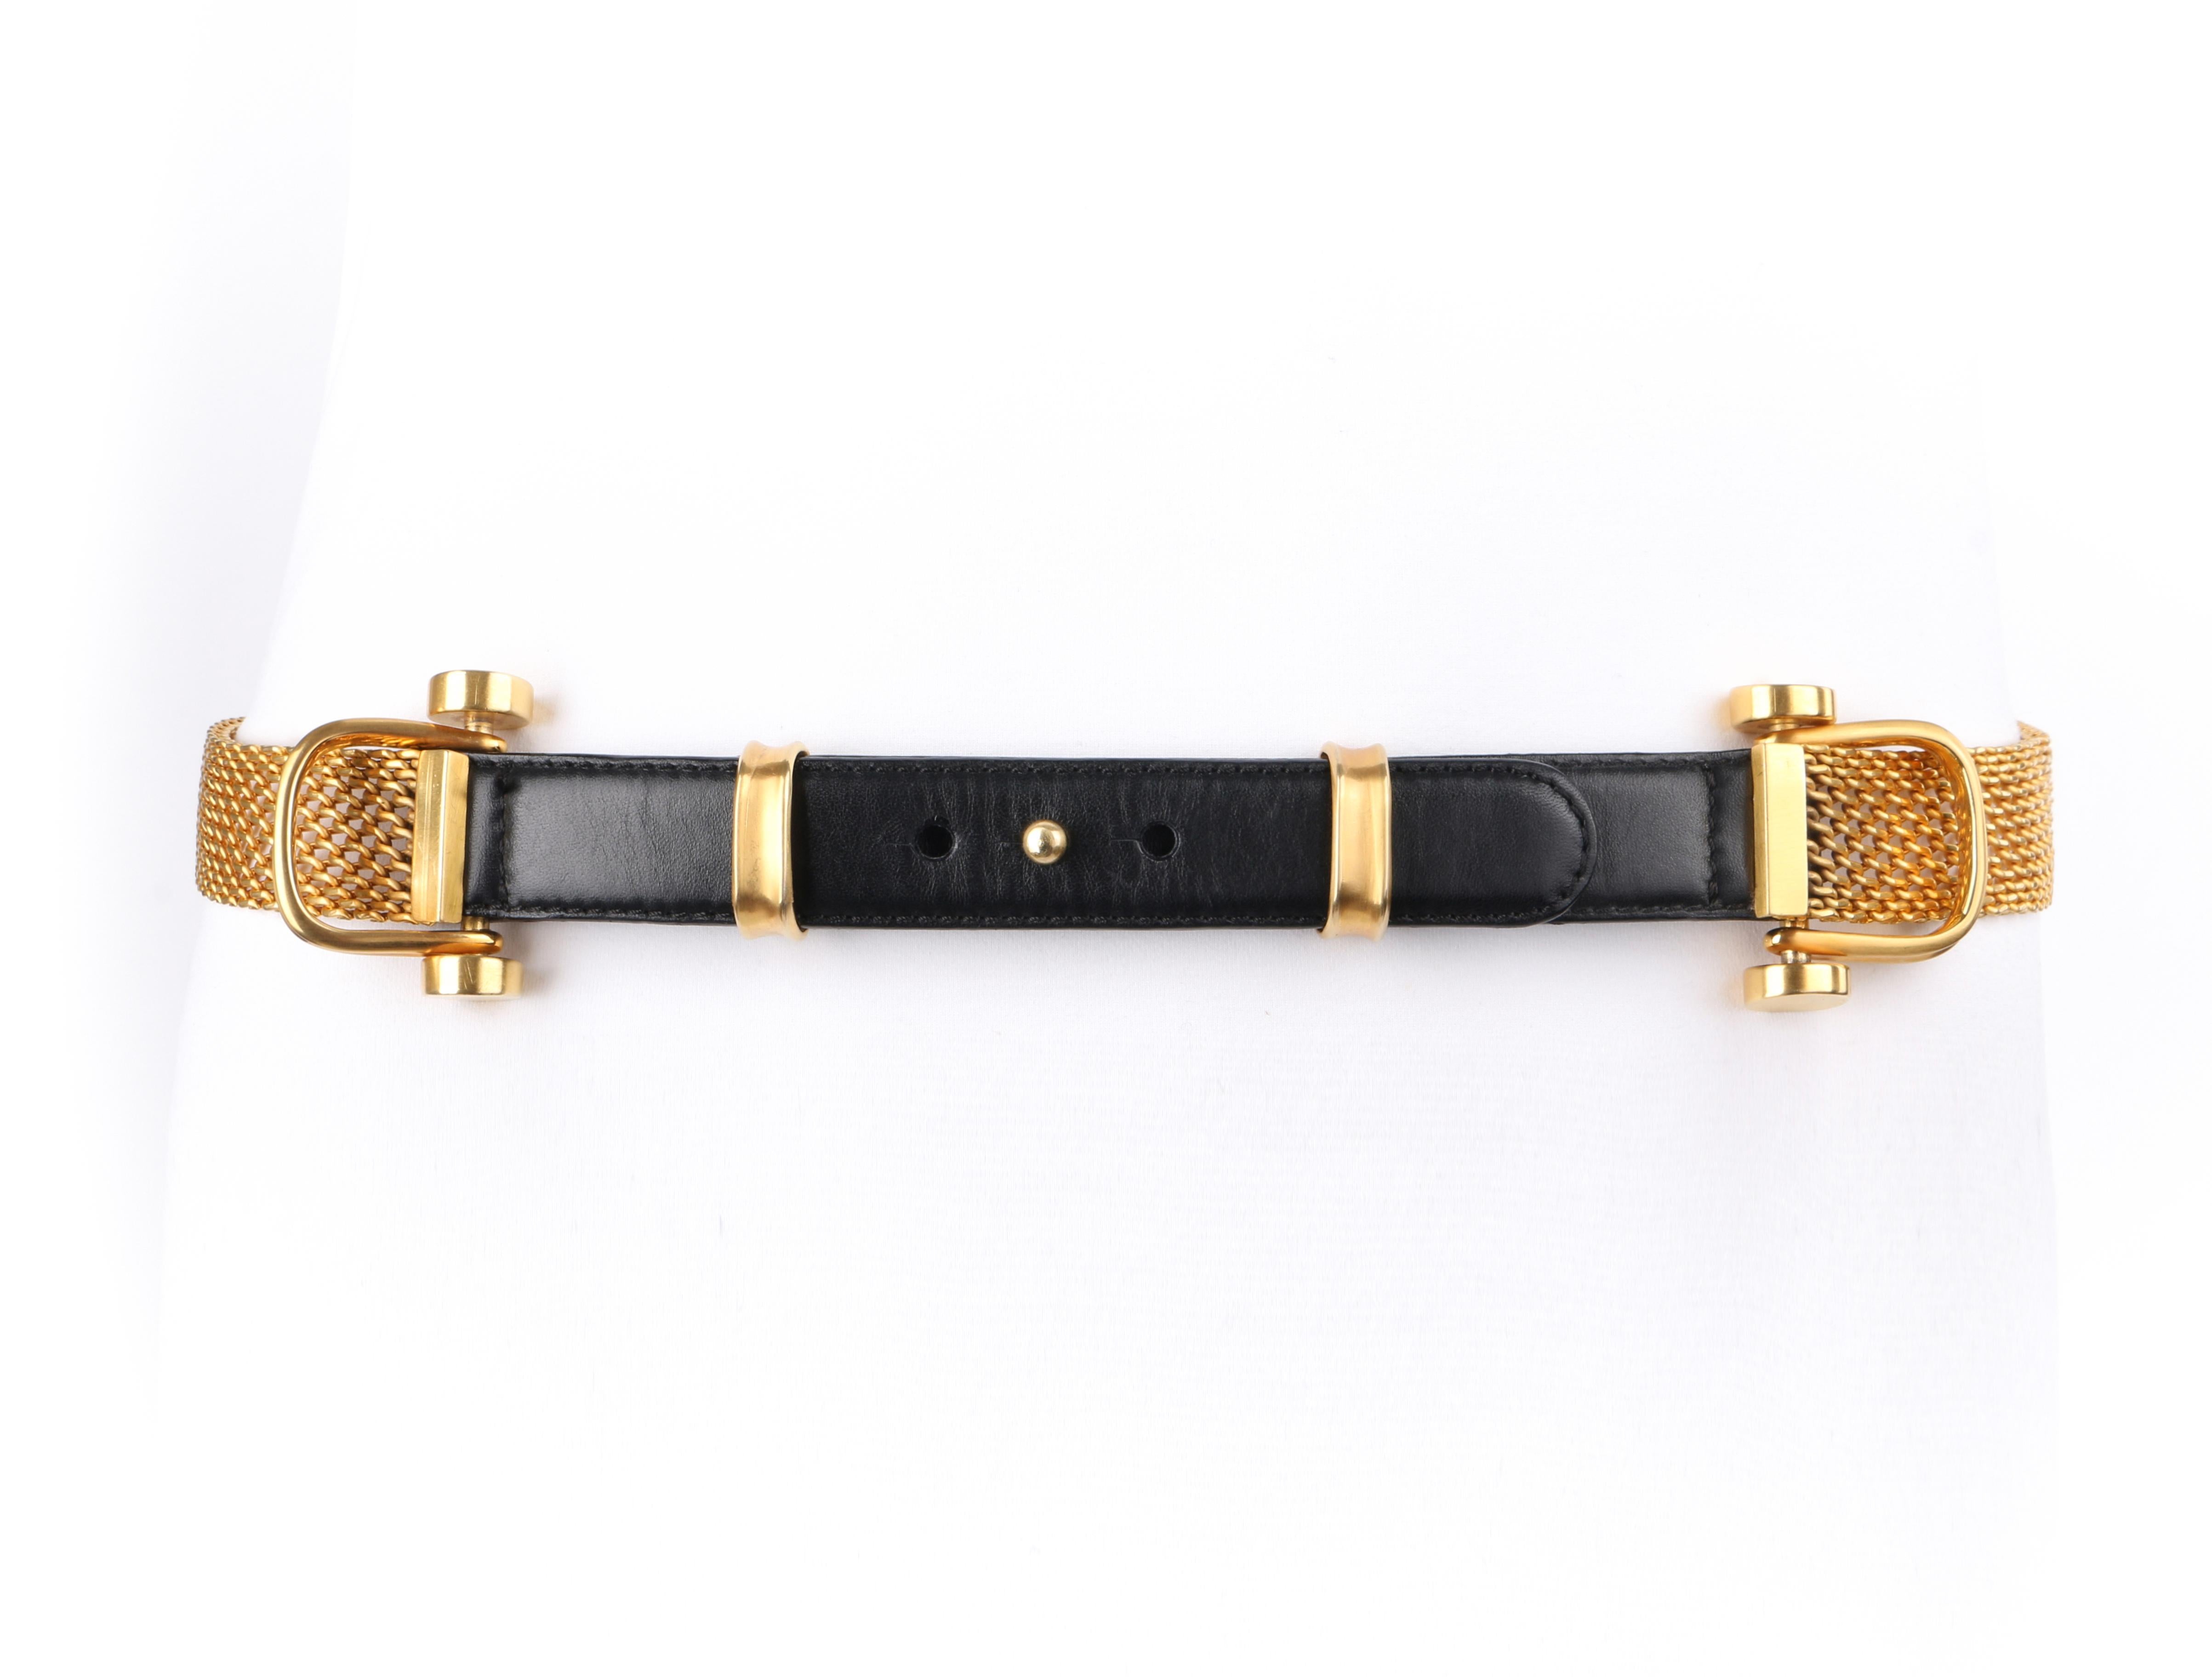 DONNA KARAN c.1990s Black & Gold Leather Chainmail Pin Front Waist Belt 

Circa: 1990’s
Label(s): Donna Karan New York
Designer: Donna Karan
Style: Waist belt
Color(s): Black (belt), shades of gold (hardware)
Marked Fabric Content: “Genuine Leather”